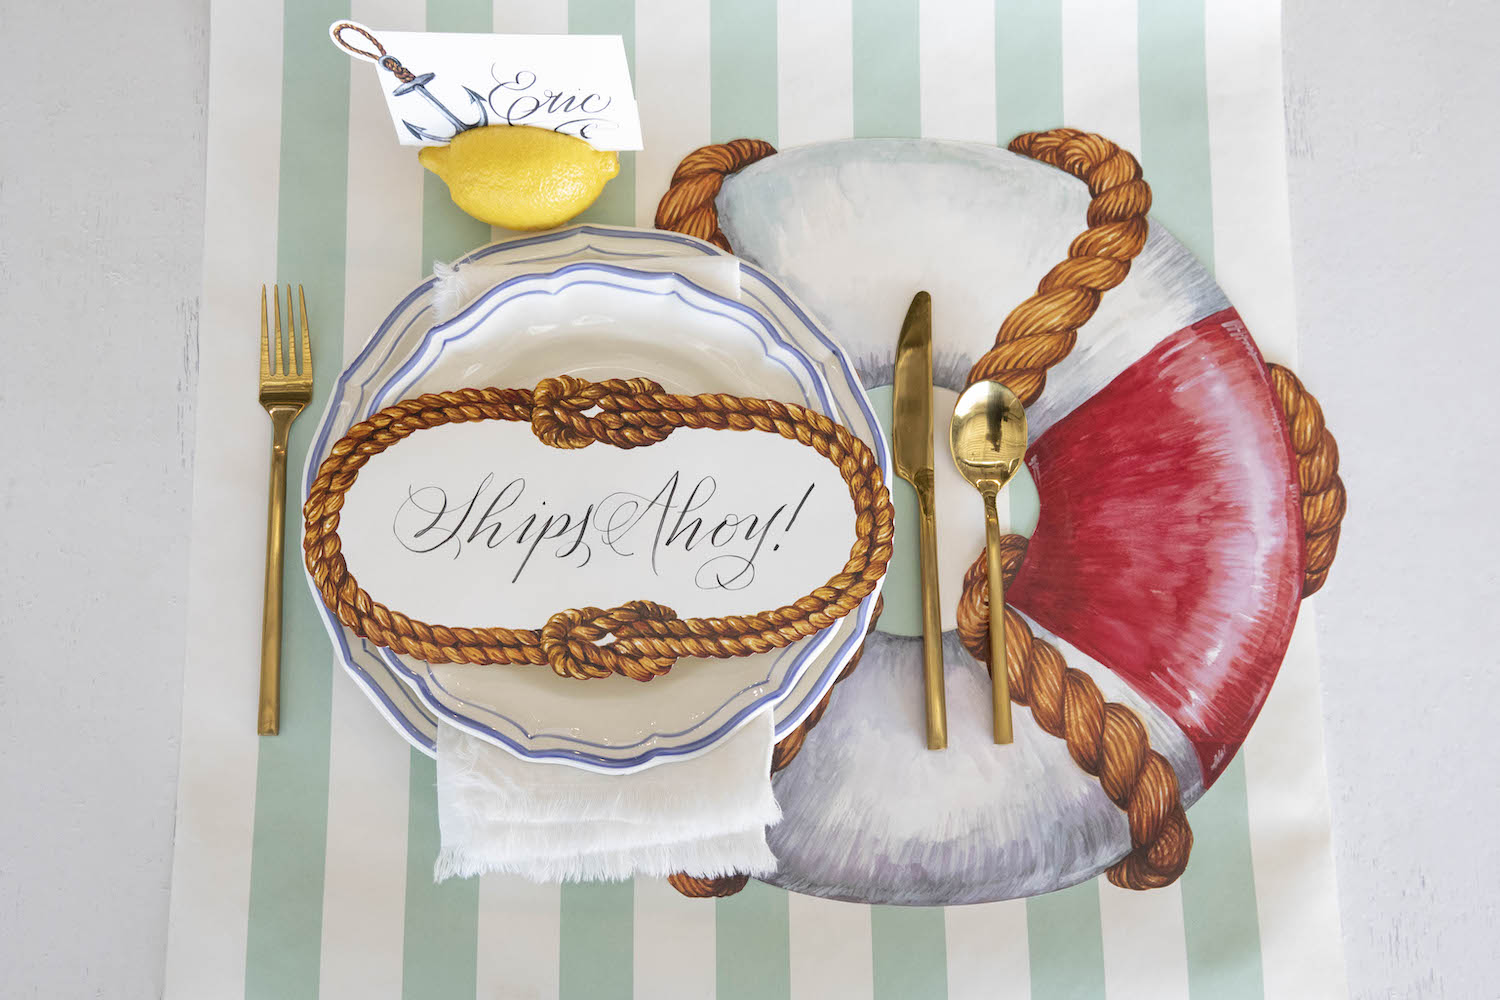 The Die-cut Life Preserver Placemat under an elegant nautical-themed place setting, from above.